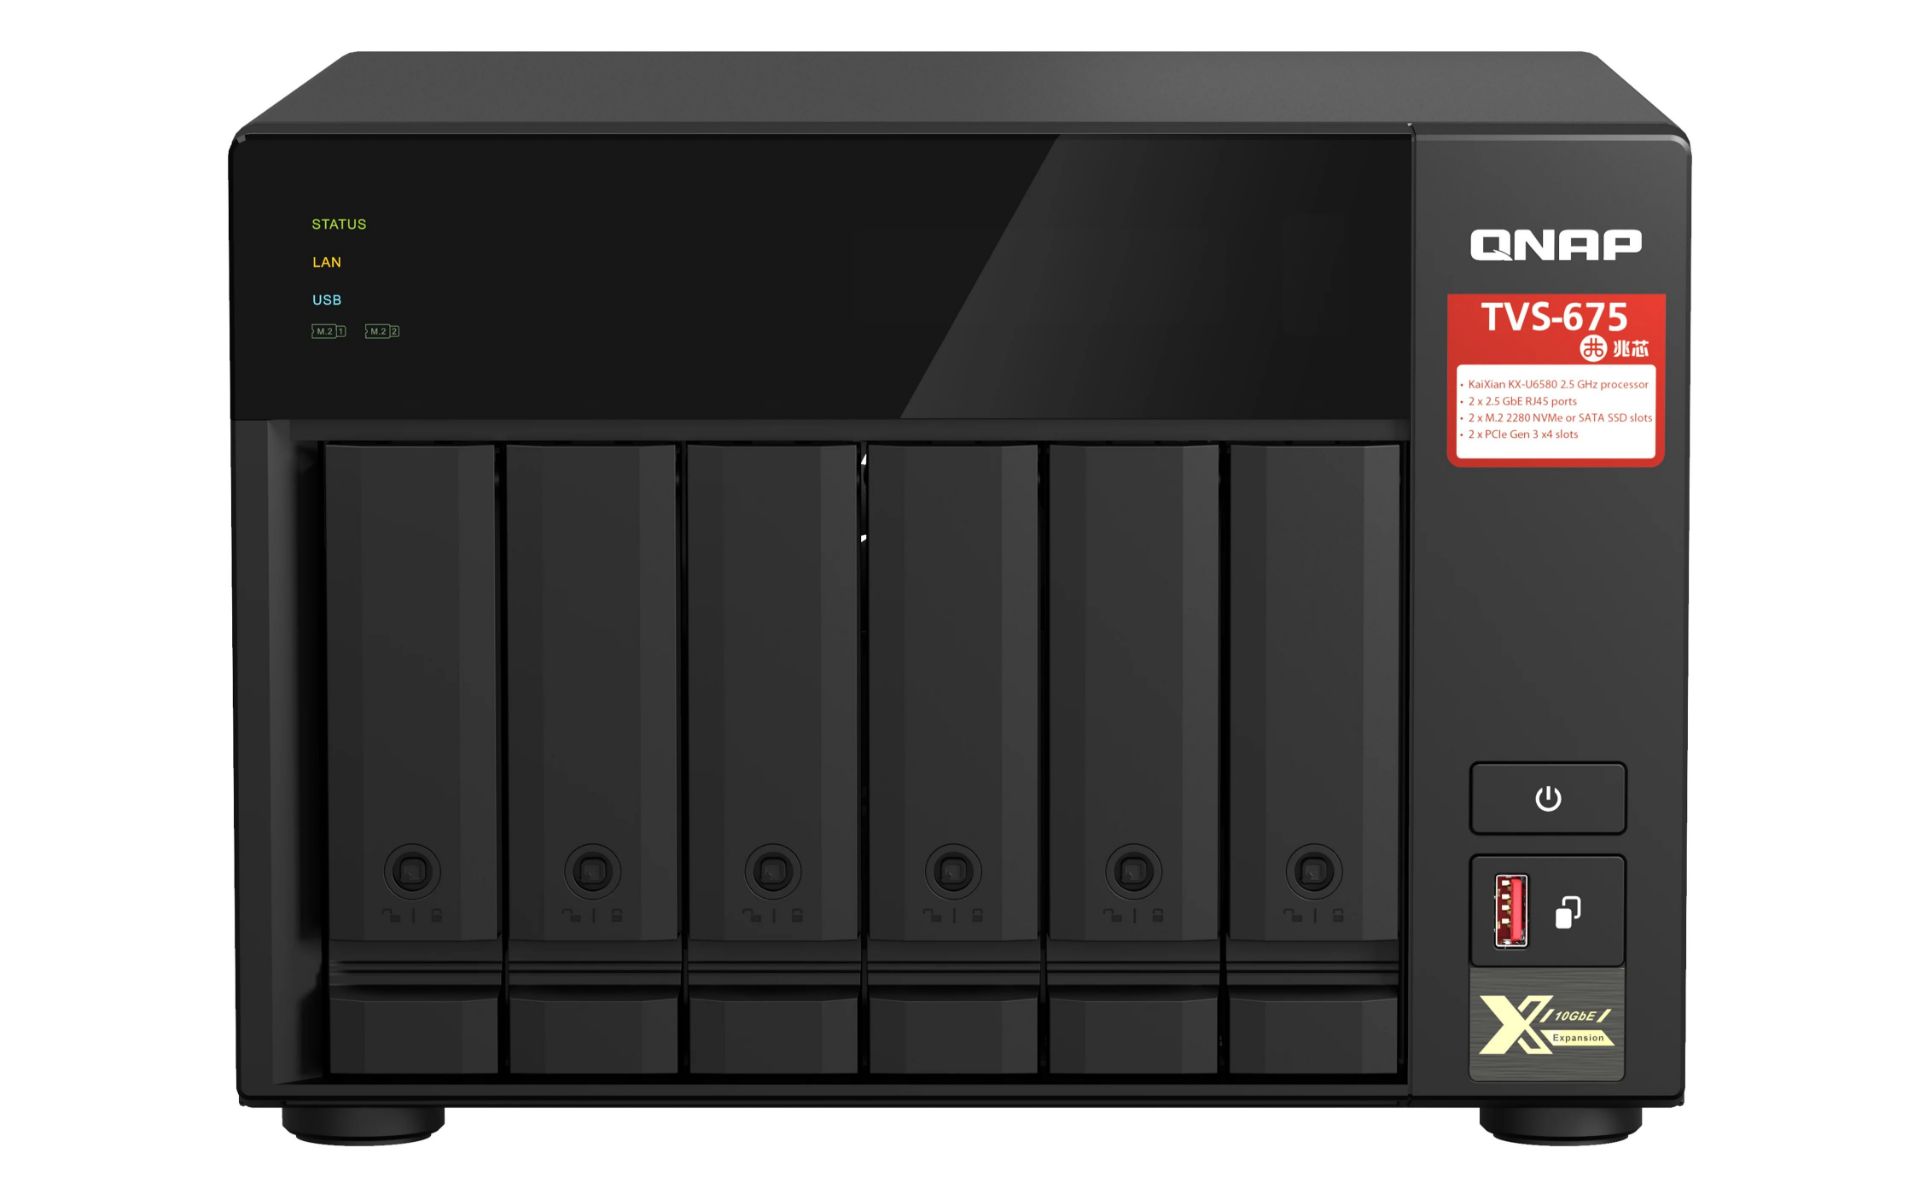 NEW & BOXED QNAP TVS-675 6 Bay Desktop NAS Enclosure with 8GB RAM. RRP £1013. The TVS-675 is a